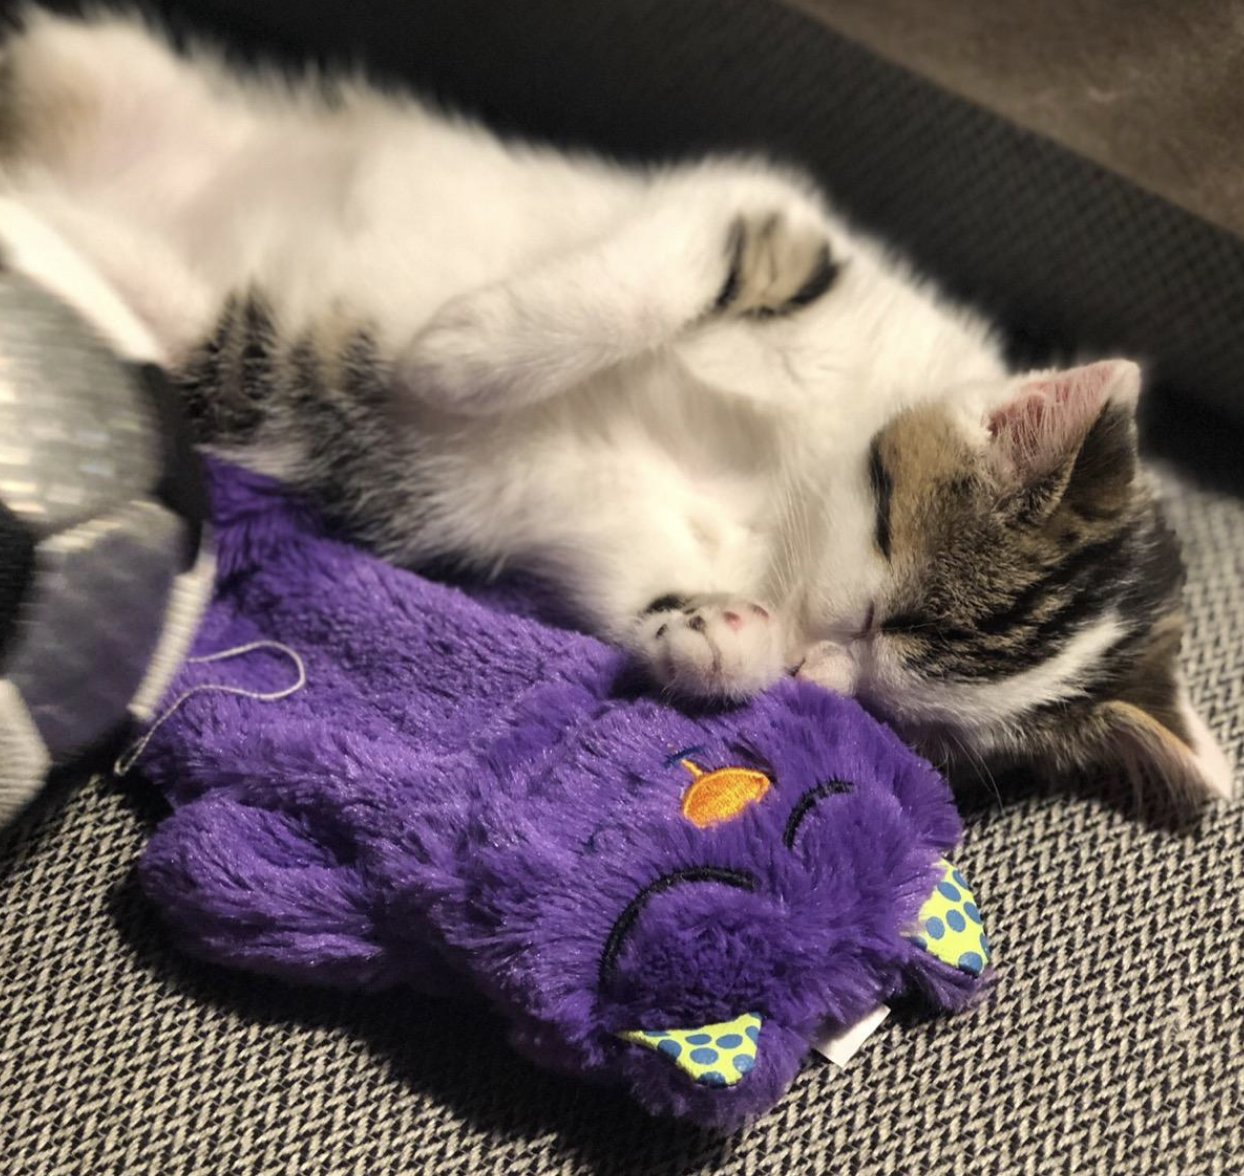 A customer review photo of their kitten cuddling the toy